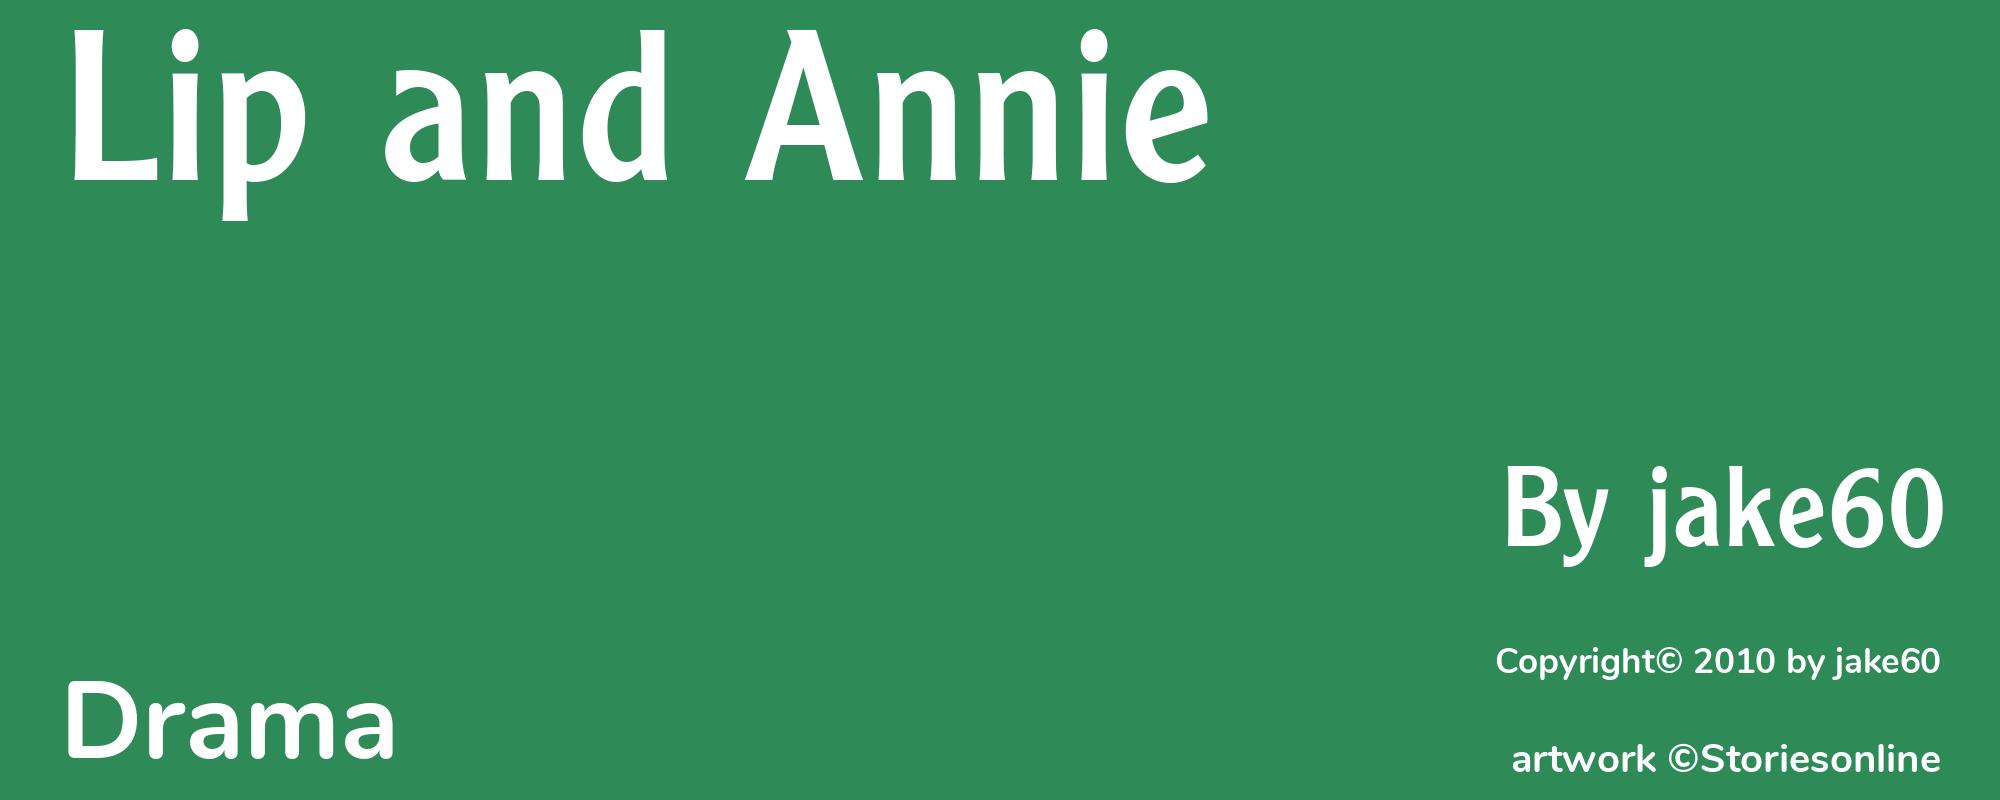 Lip and Annie - Cover